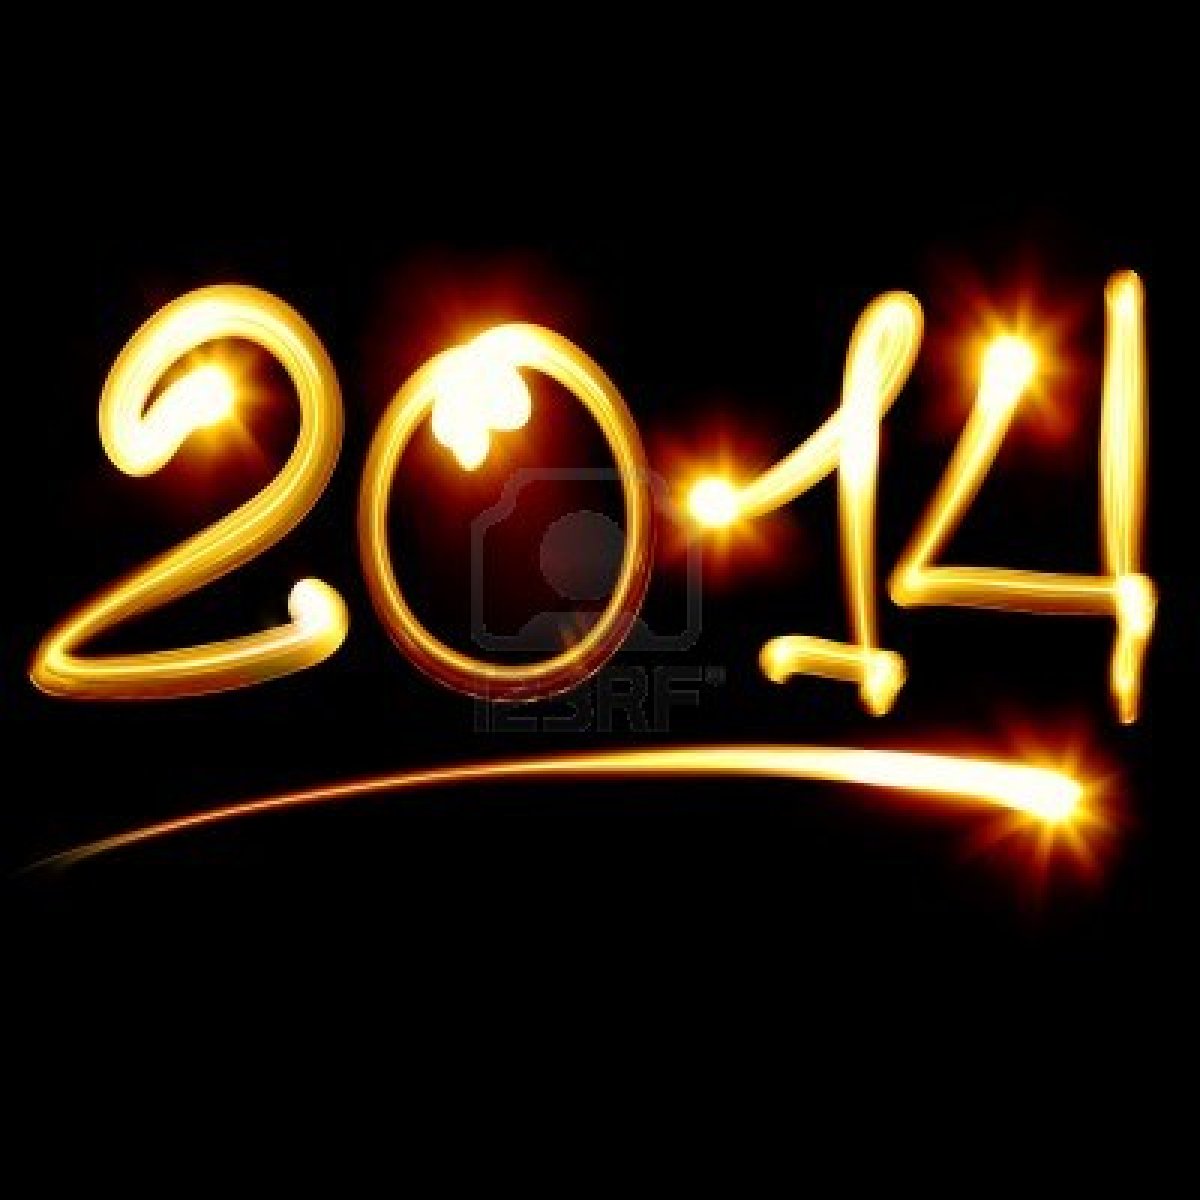 15732588 happy new year 2014 message over black background